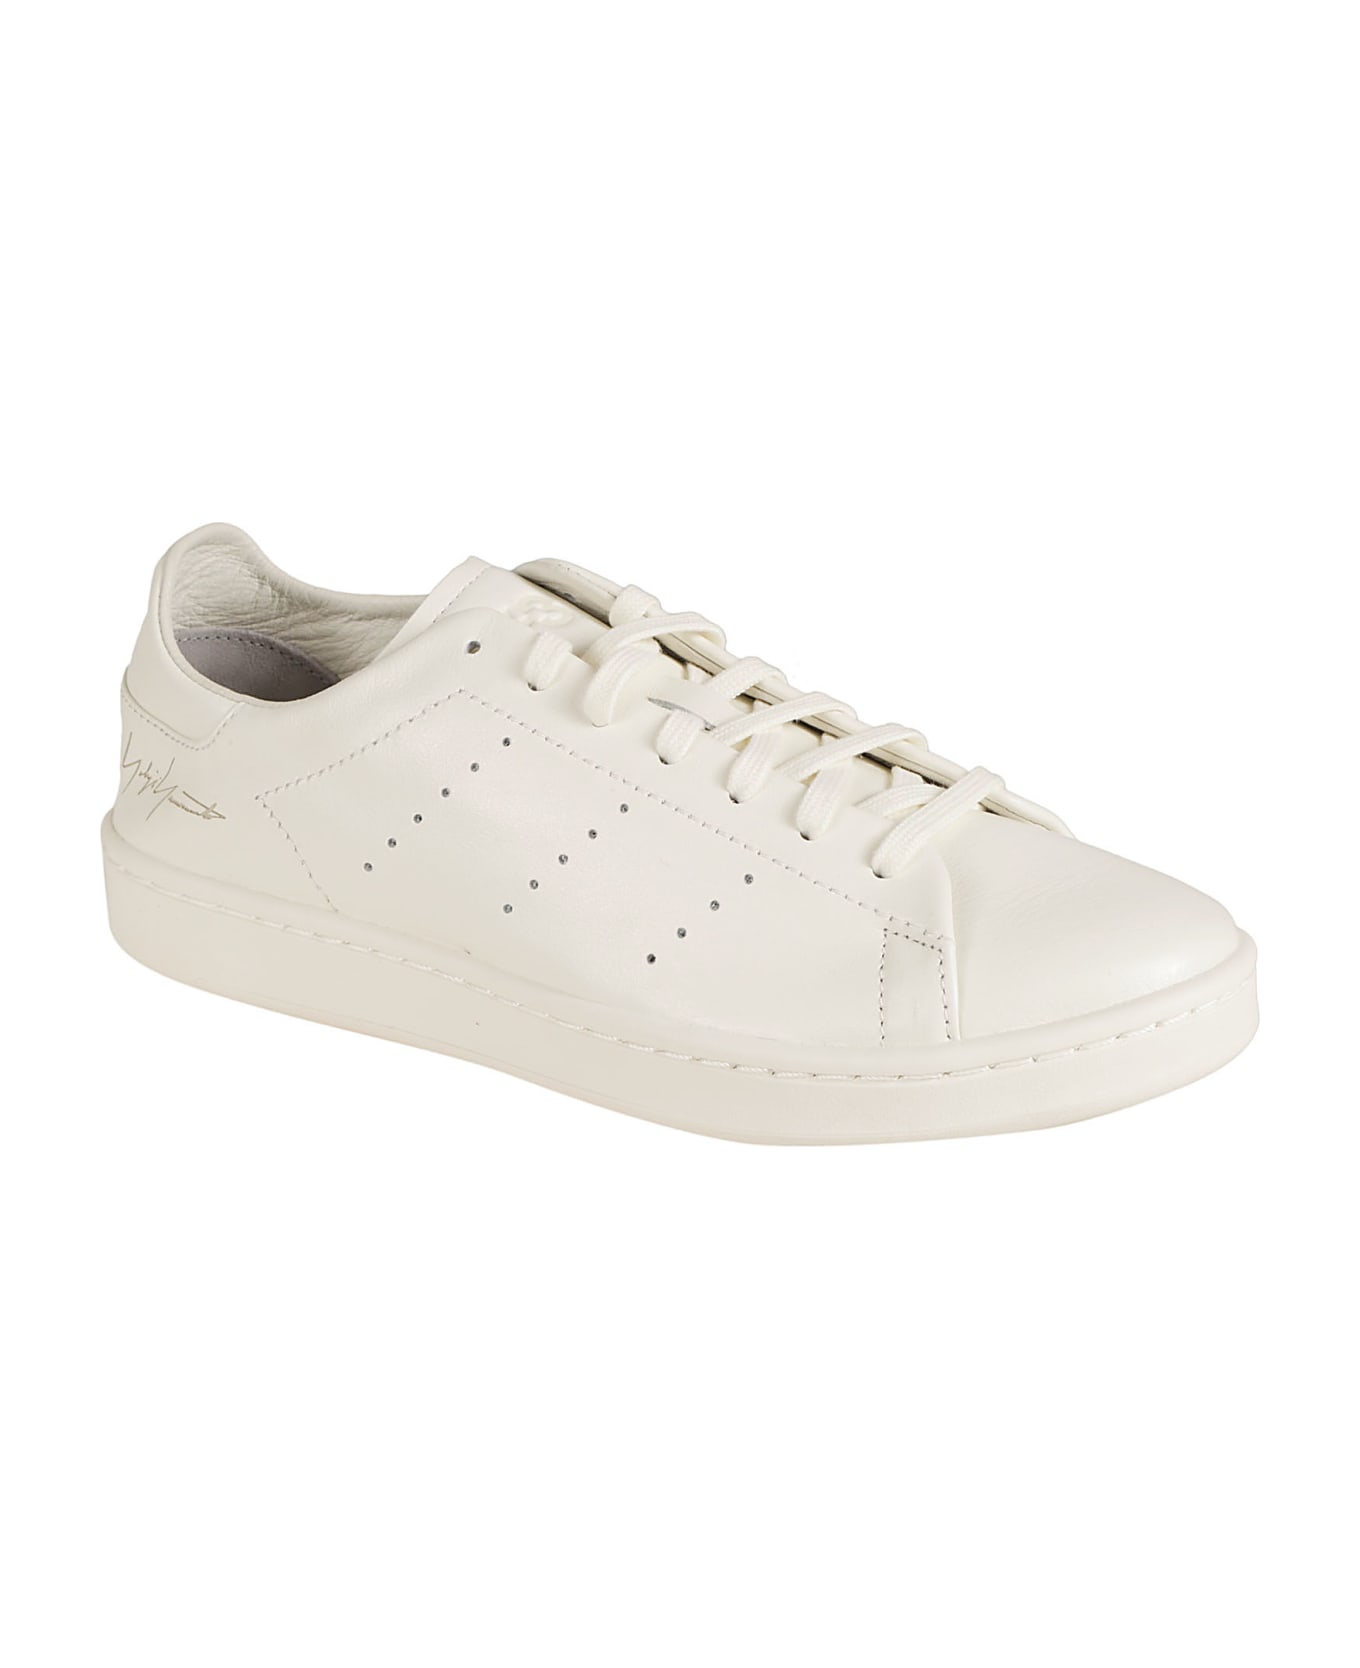 Y-3 Stan Smith Sneakers - White/Black スニーカー